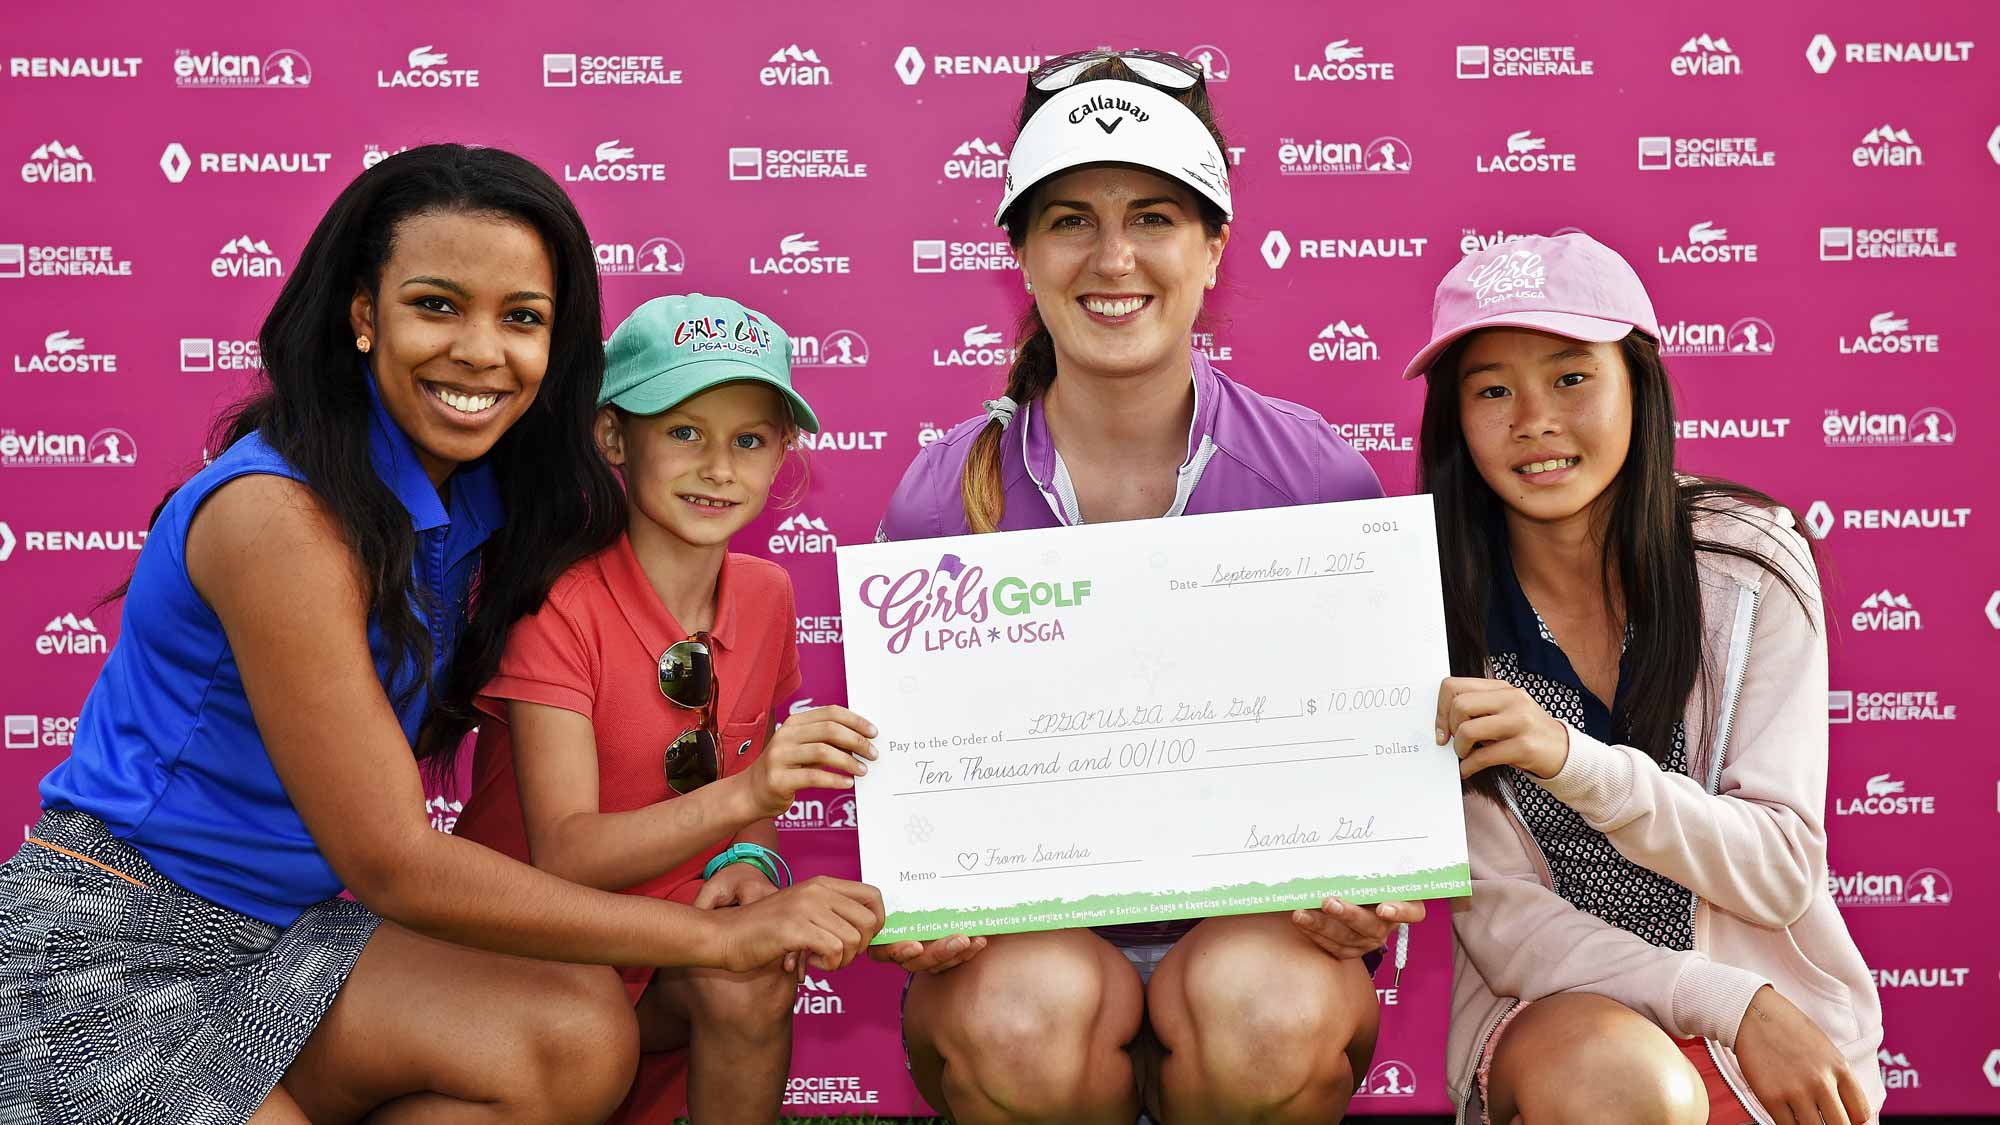 Sandra Gal presents a check for $10,000 to LPGA Girls Golf during the second round of the Evian Championship 